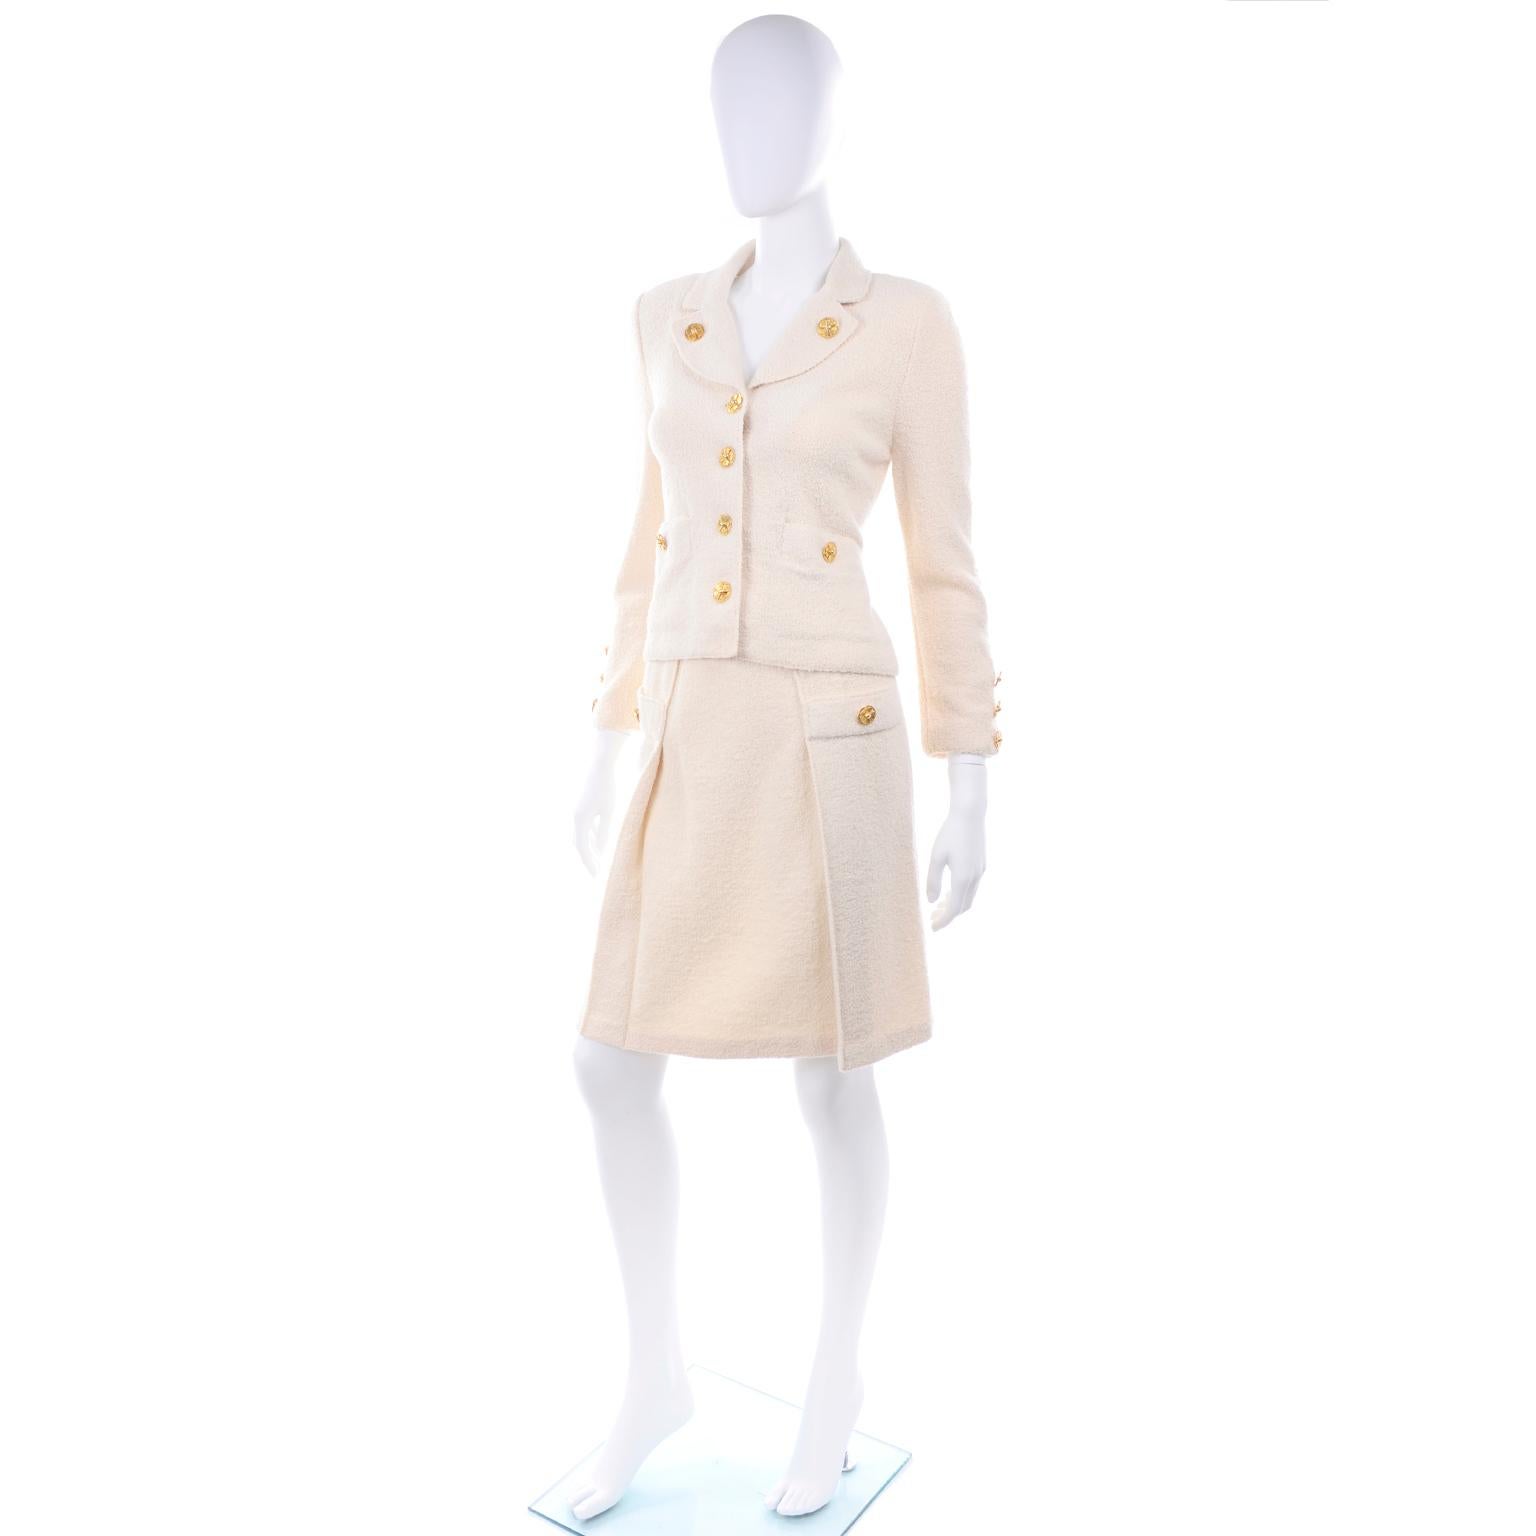 This is a really nice Adolfo for Saks Fifth Avenue vintage creamy ivory knit skirt suit with nice gold buttons.  We really love Adolfo suits and have been collecting them for quite some time now.  This is a great day dress alternative and is easy to